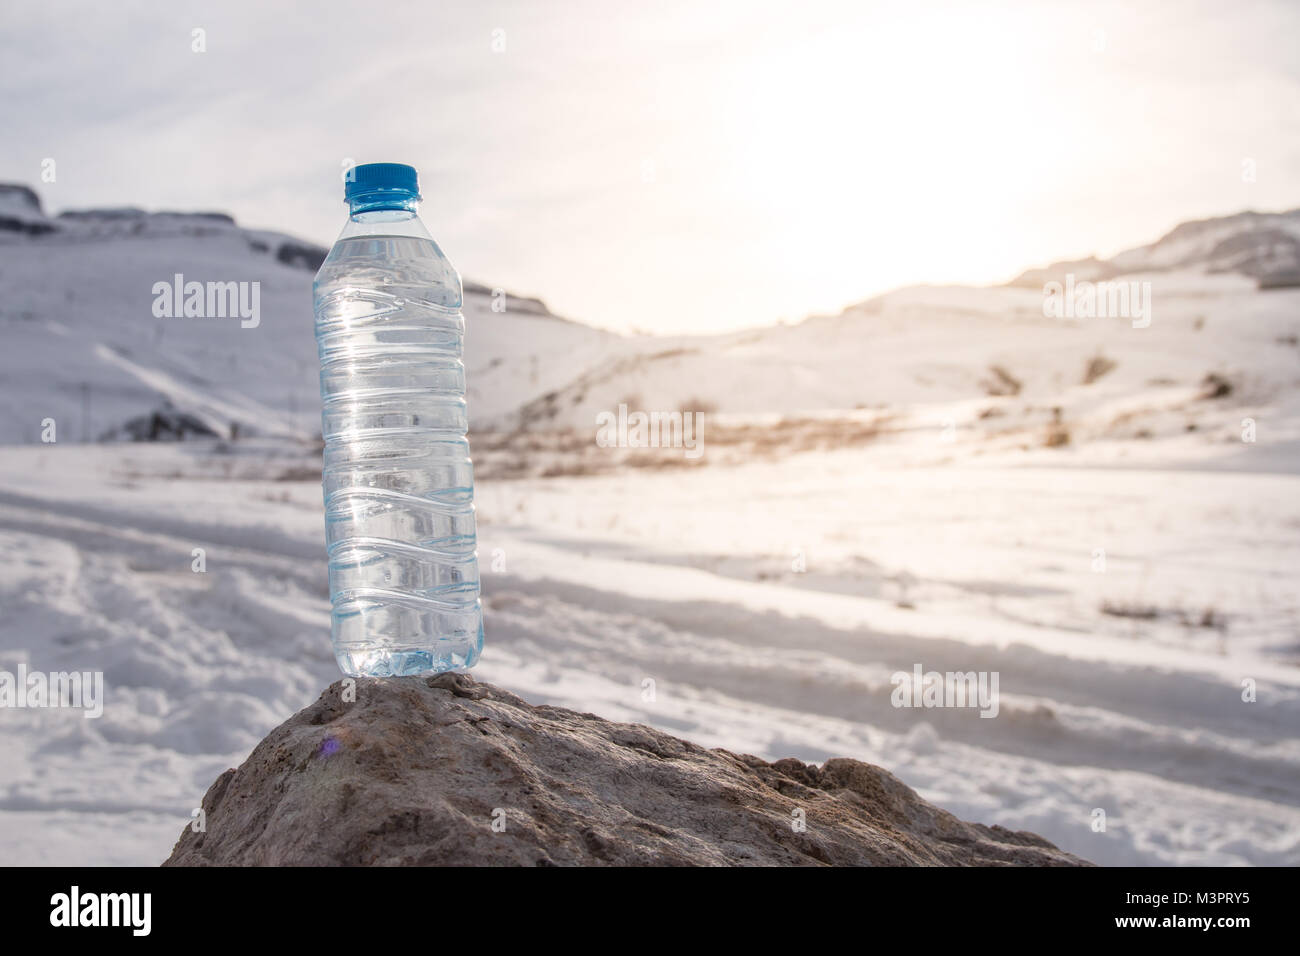 Water bottle with snowy mountain peak background. Stock Photo